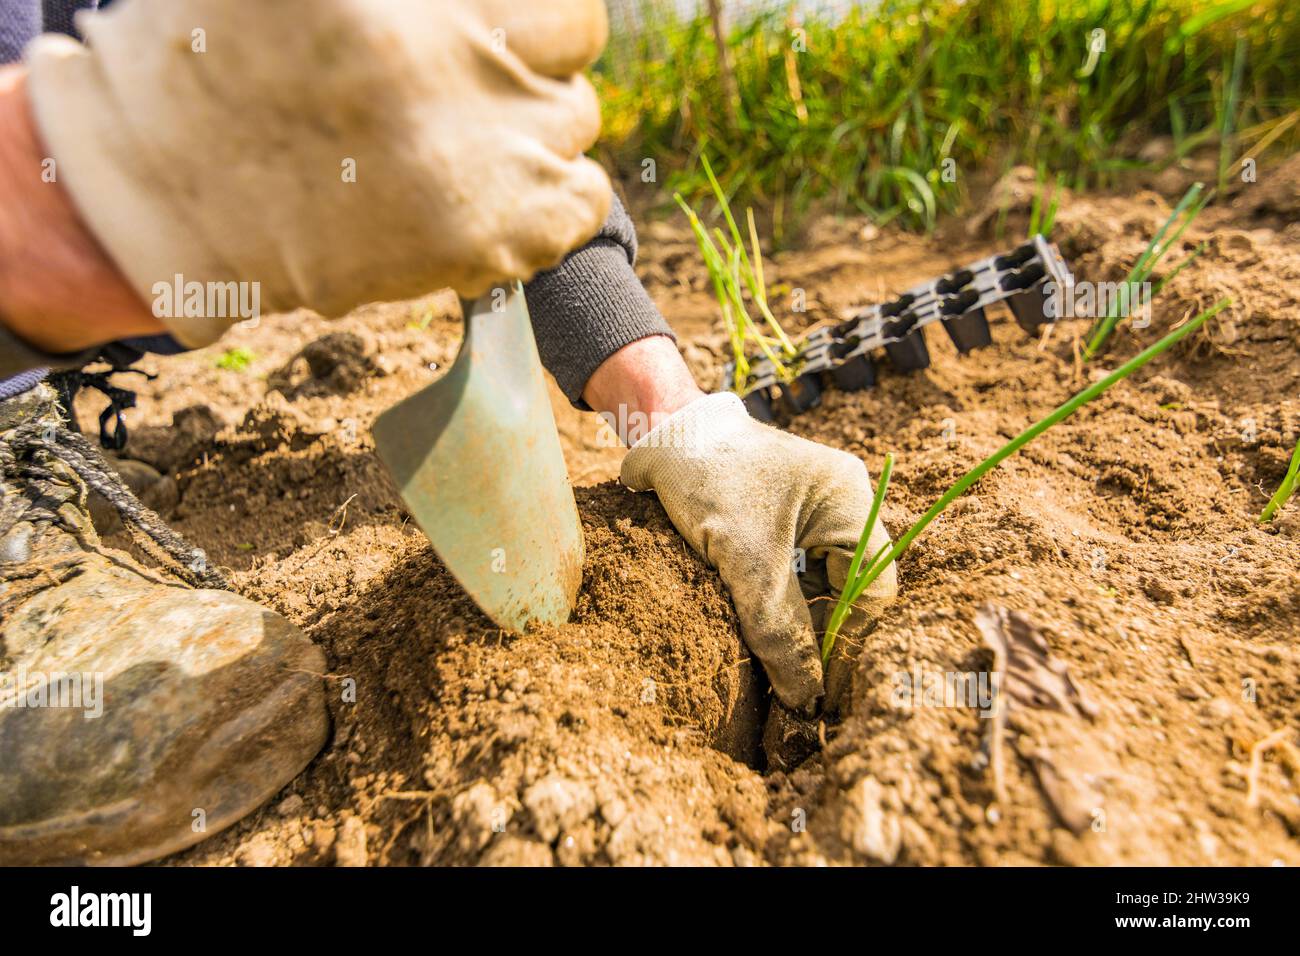 Hands of a farmer in the foreground planting sprouts of onions in an organic garden to promote a natural and healthy diet Stock Photo